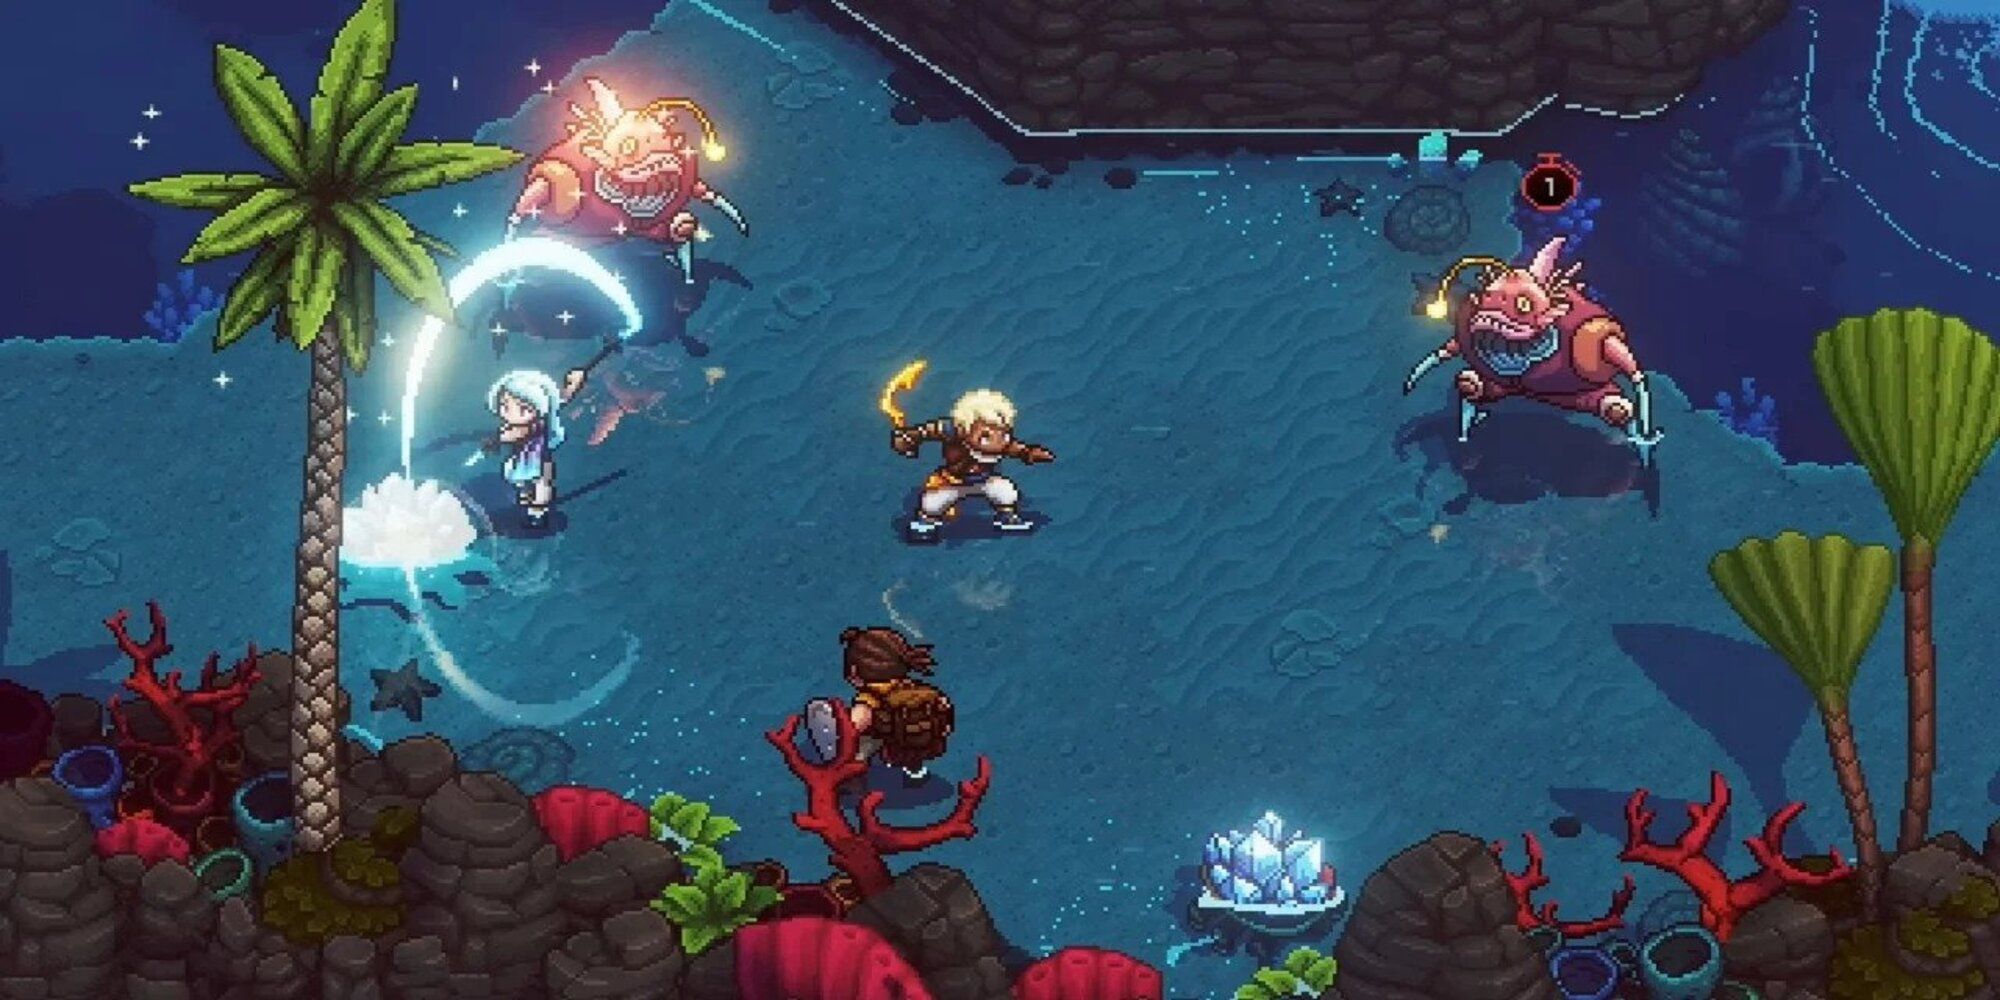 Three, 2D characters battle two monsters on the ocean floor.